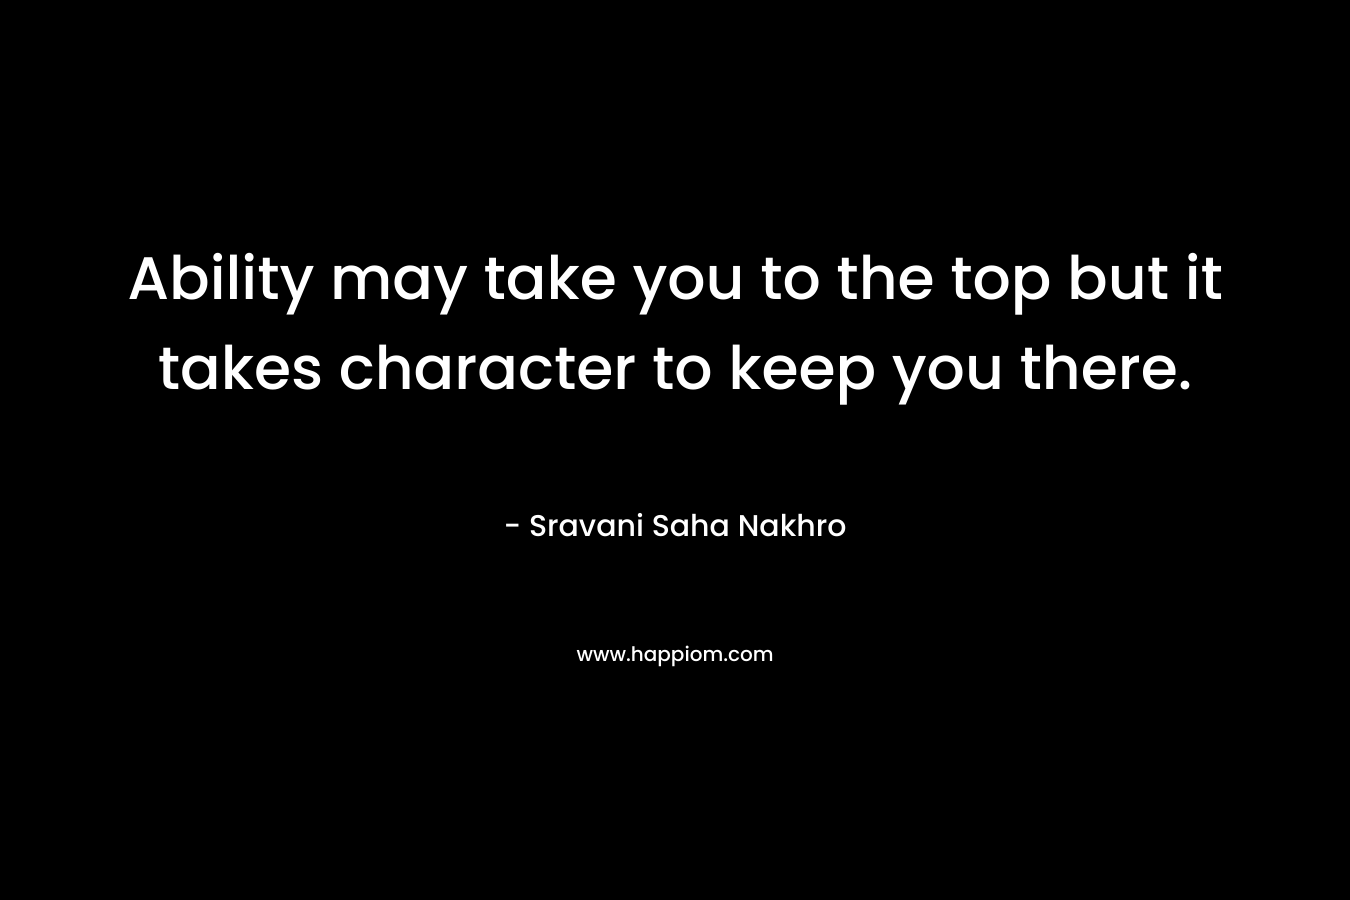 Ability may take you to the top but it takes character to keep you there.